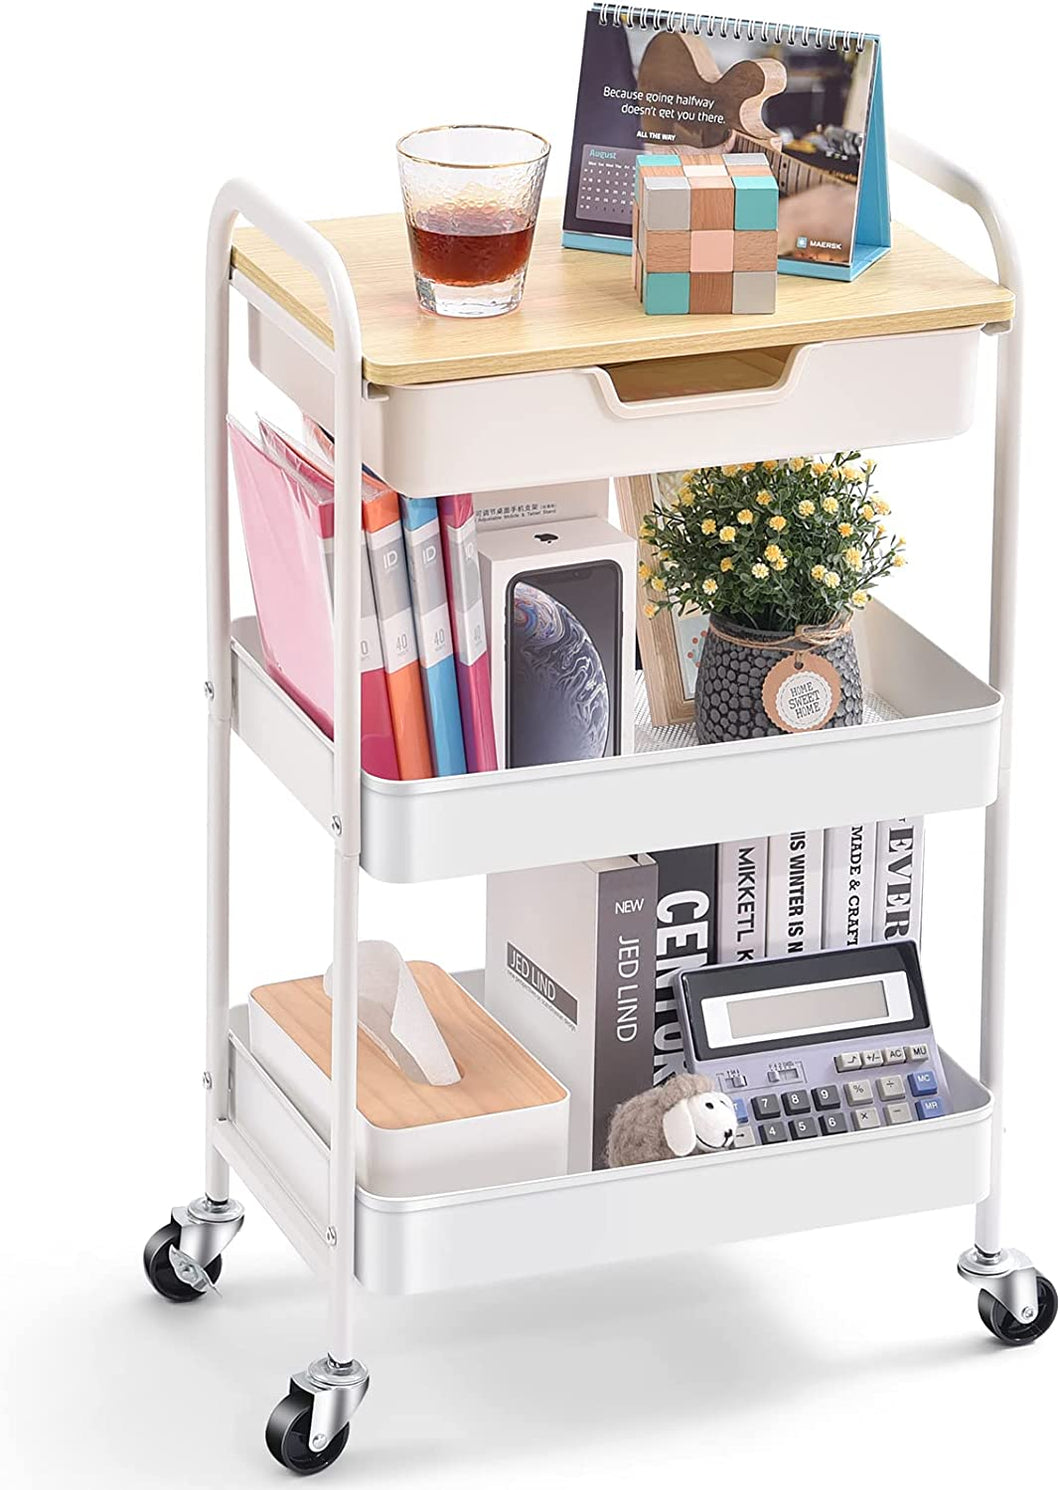 KINGRACK 3-Tier Utility Rolling Cart with Wooden Board and Drawer, Metal Storage Cart with Handle, White Trolley Kitchen Organizer Rolling Desk with Locking Wheels for Office, Classroom, Home, Bedroom  WK830549-1